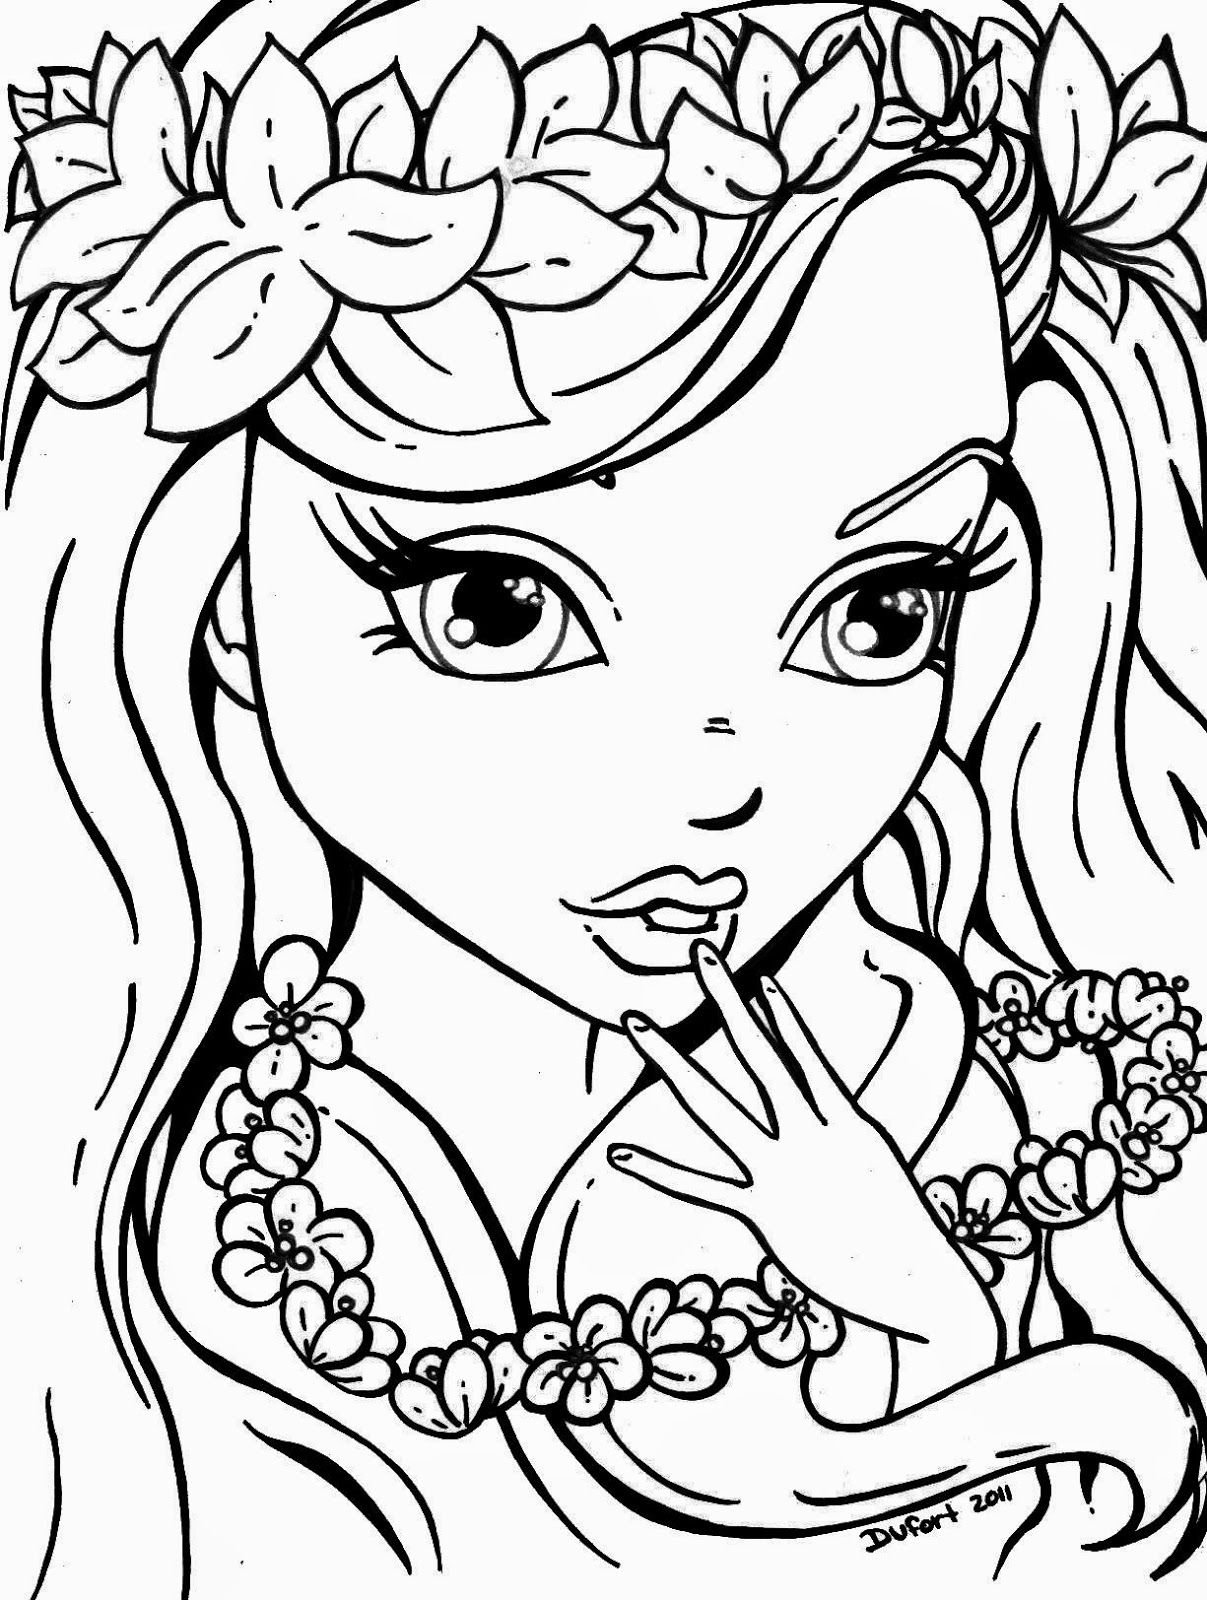 Fun For Girls - Coloring Pages for Kids and for Adults